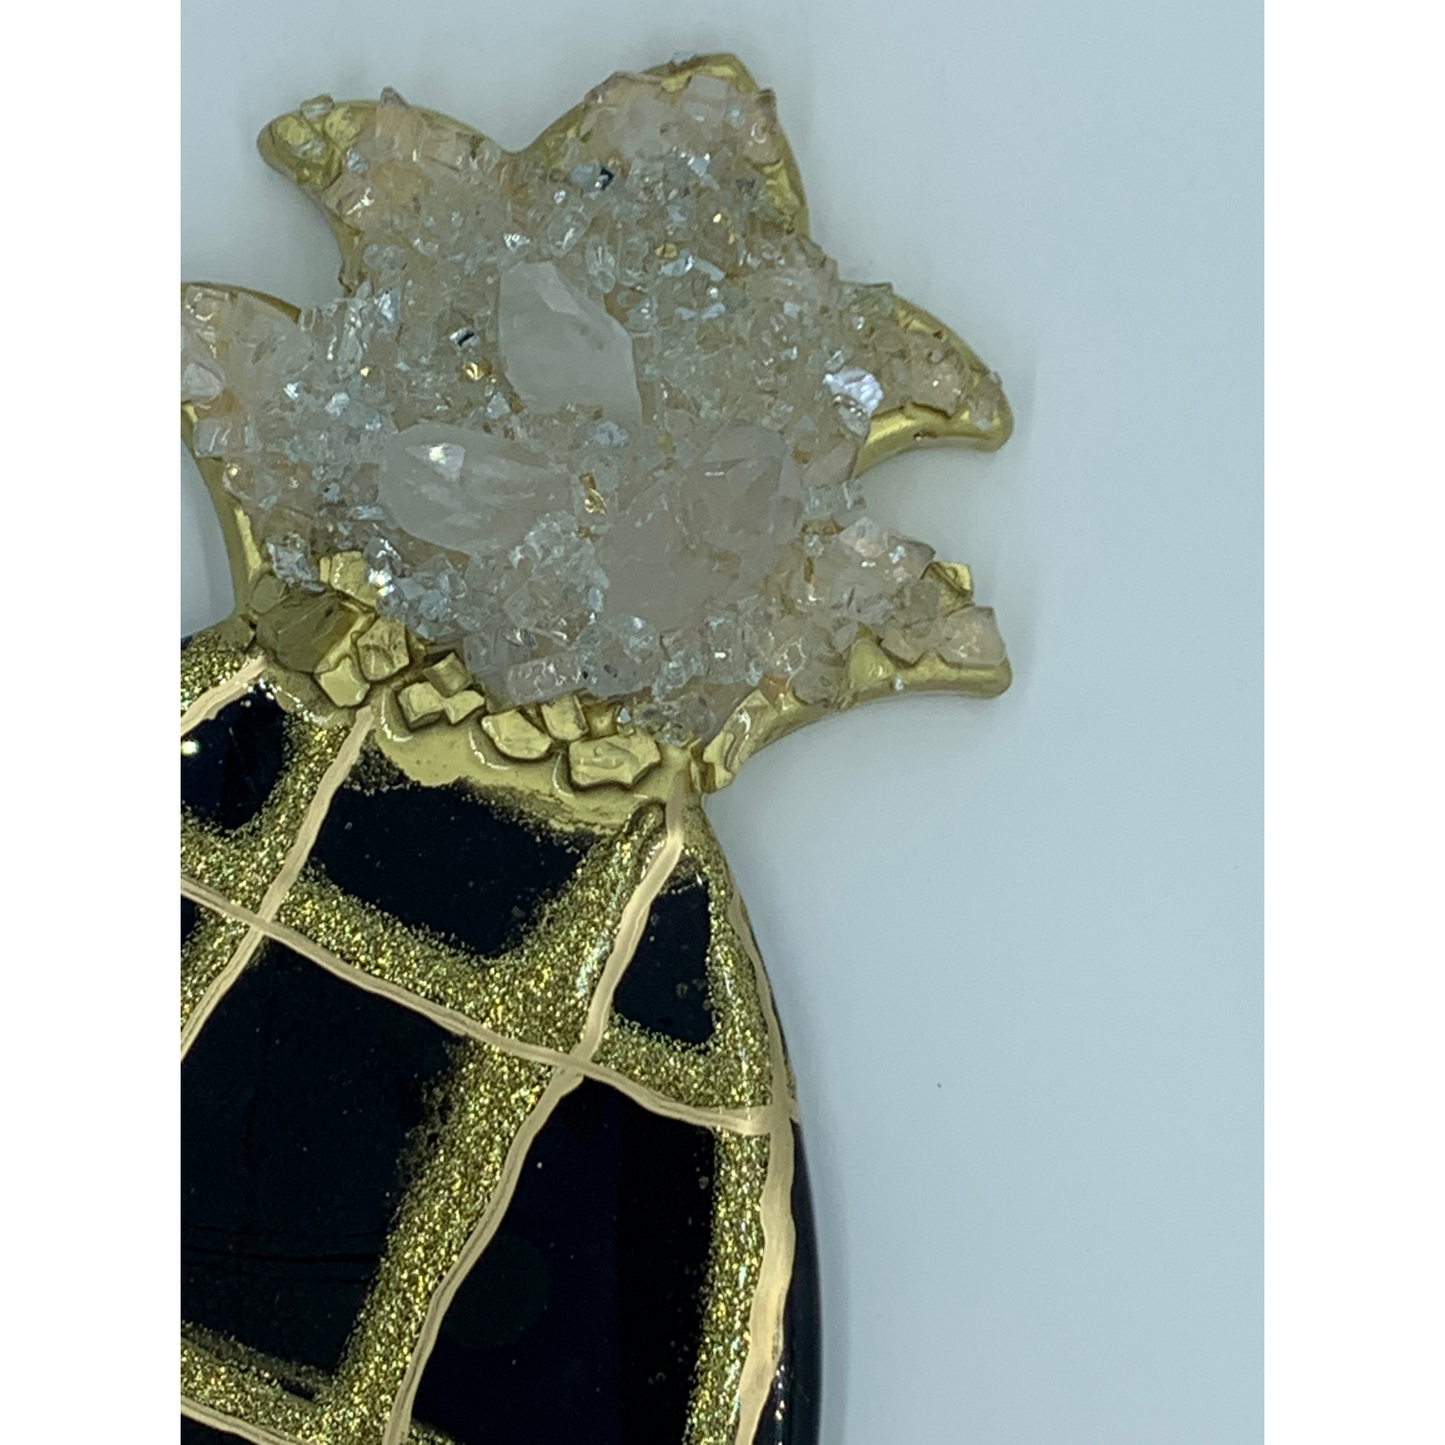 "Wear Your Crown" Gorgeous Geode Pineapple Modern Resin Wall Art or Tray